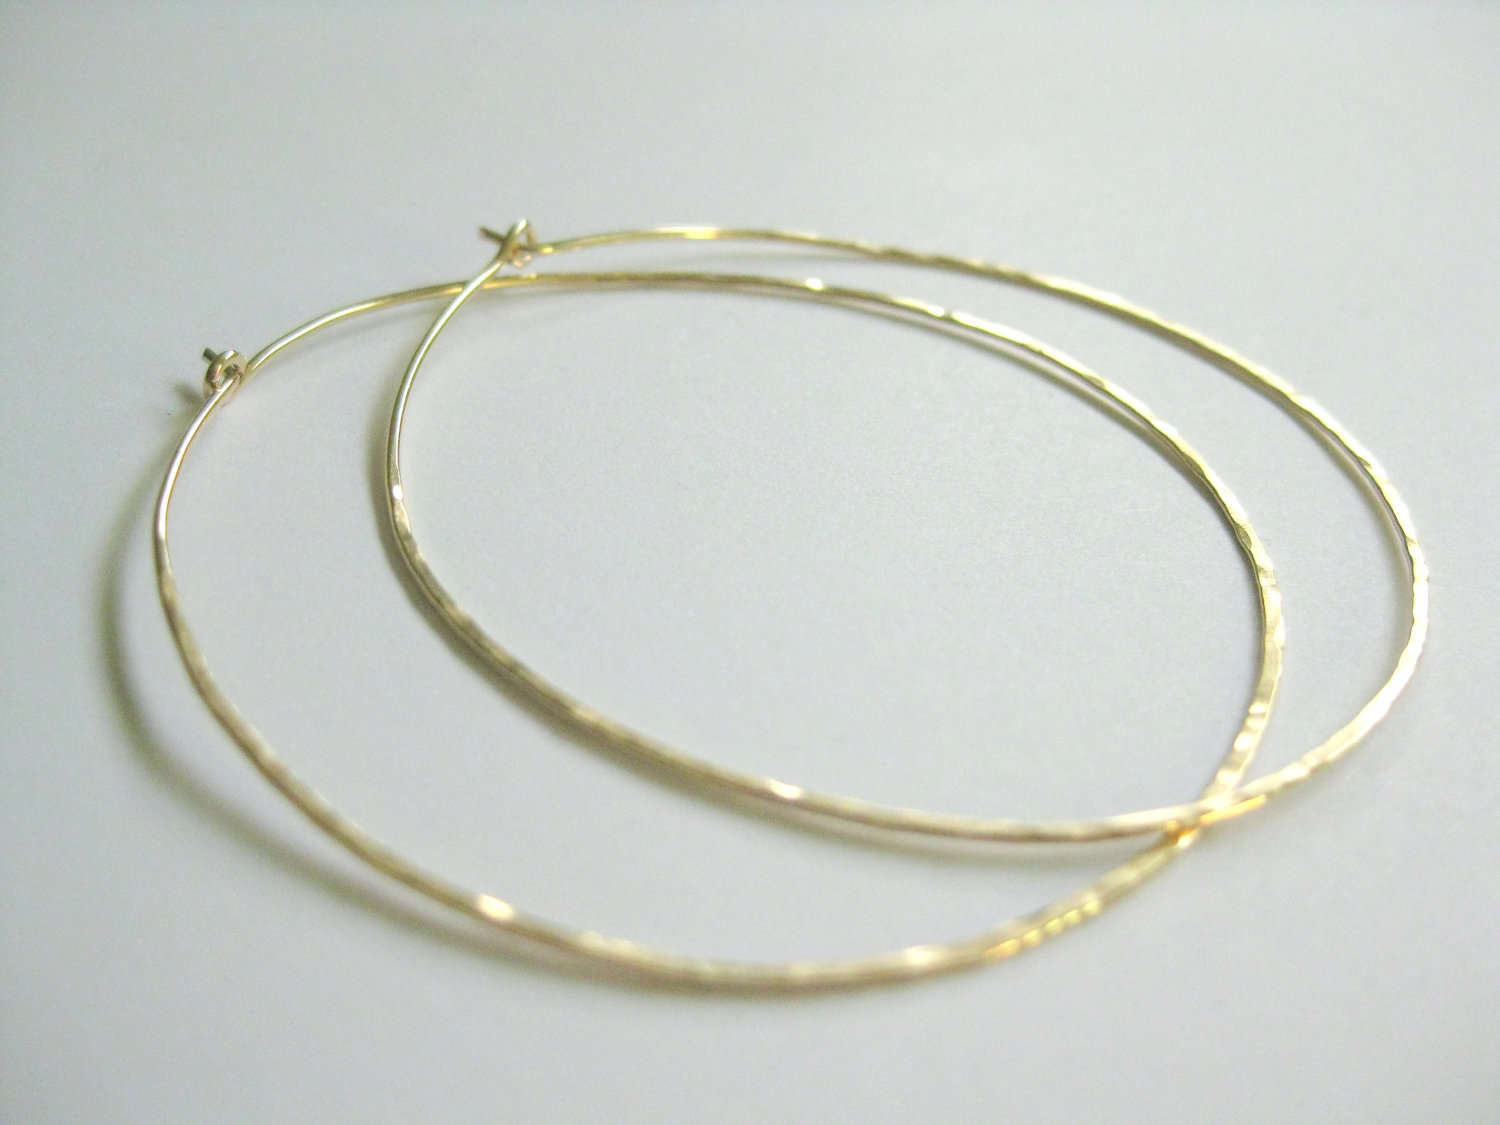 Thin Hammered Gold Hoop Earrings, Large 14k Gold Filled Hoops on Luulla